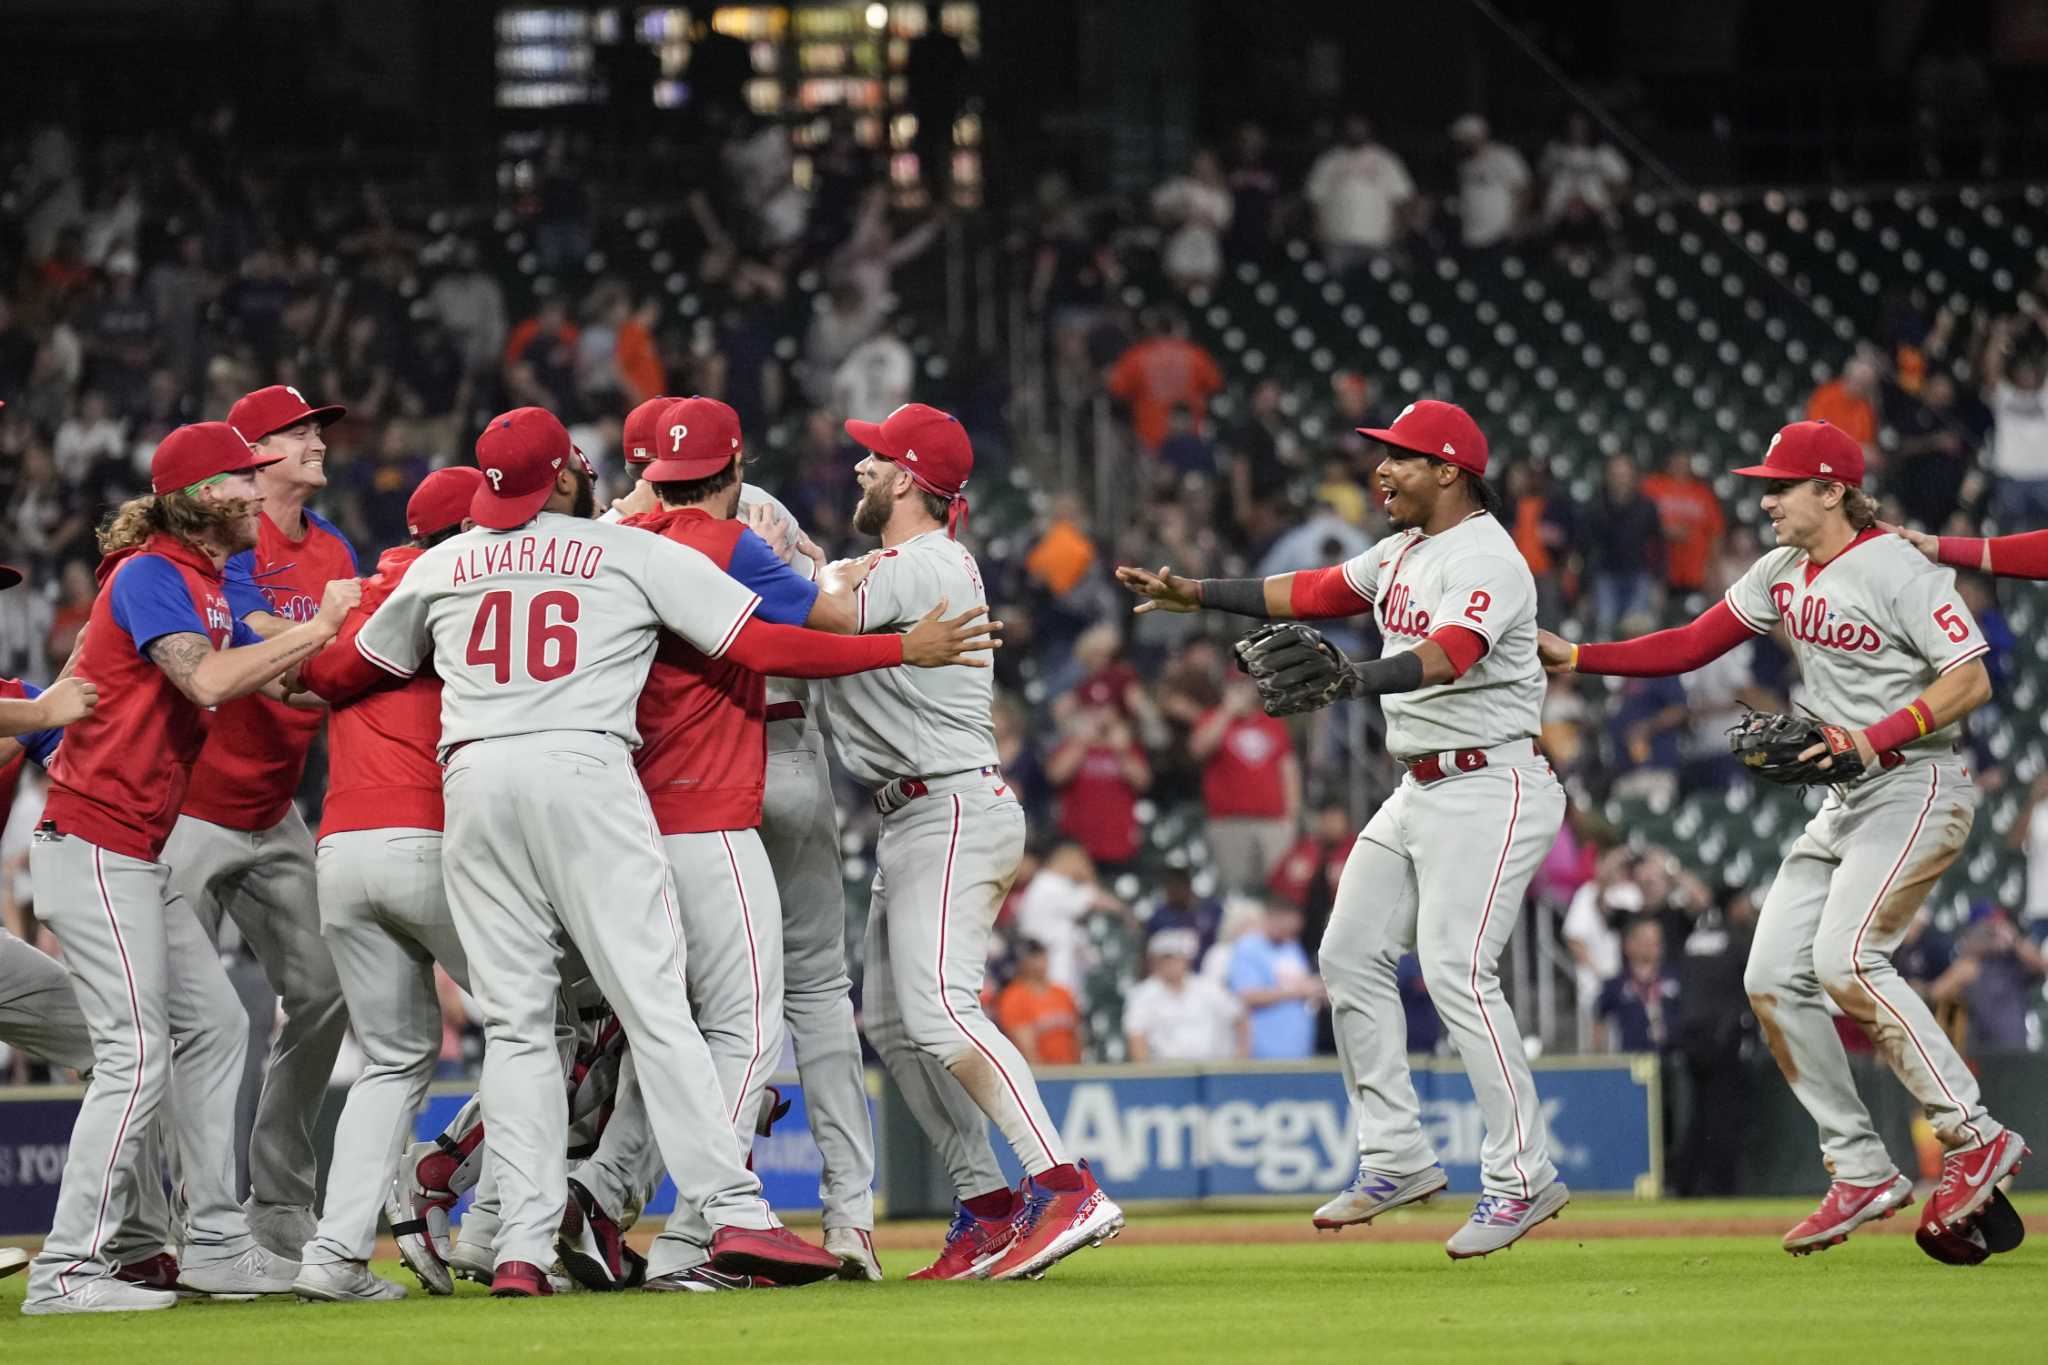 Phillies vs. Astros World Series showing many thrills of MLB